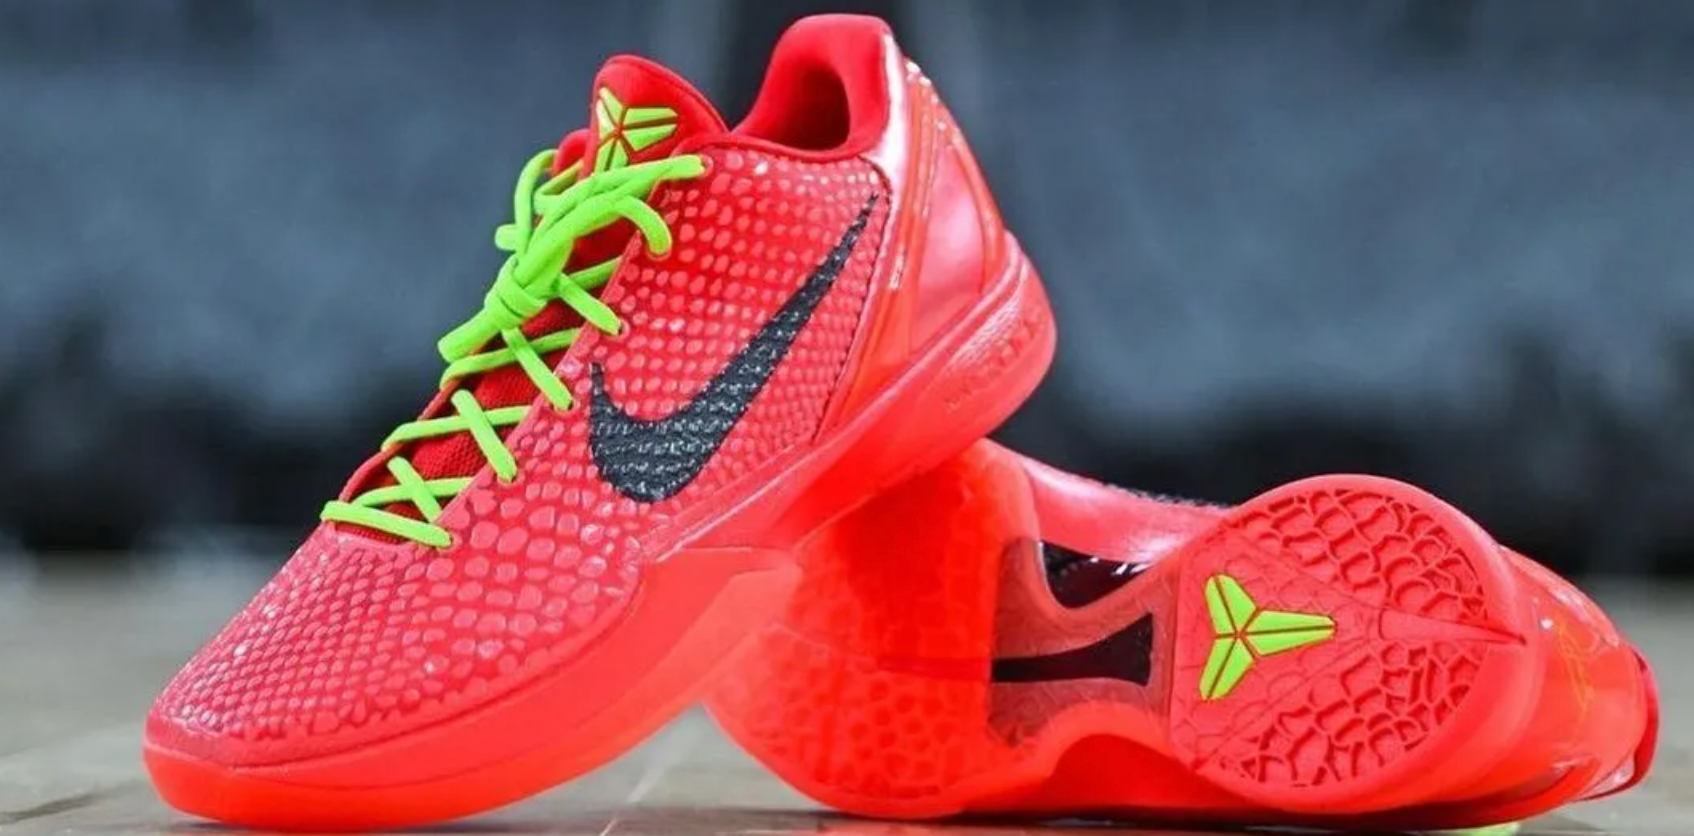 Get Ready for the Drop: Nike Kobe 6 'Reverse Grinch' Sets the Holiday ...